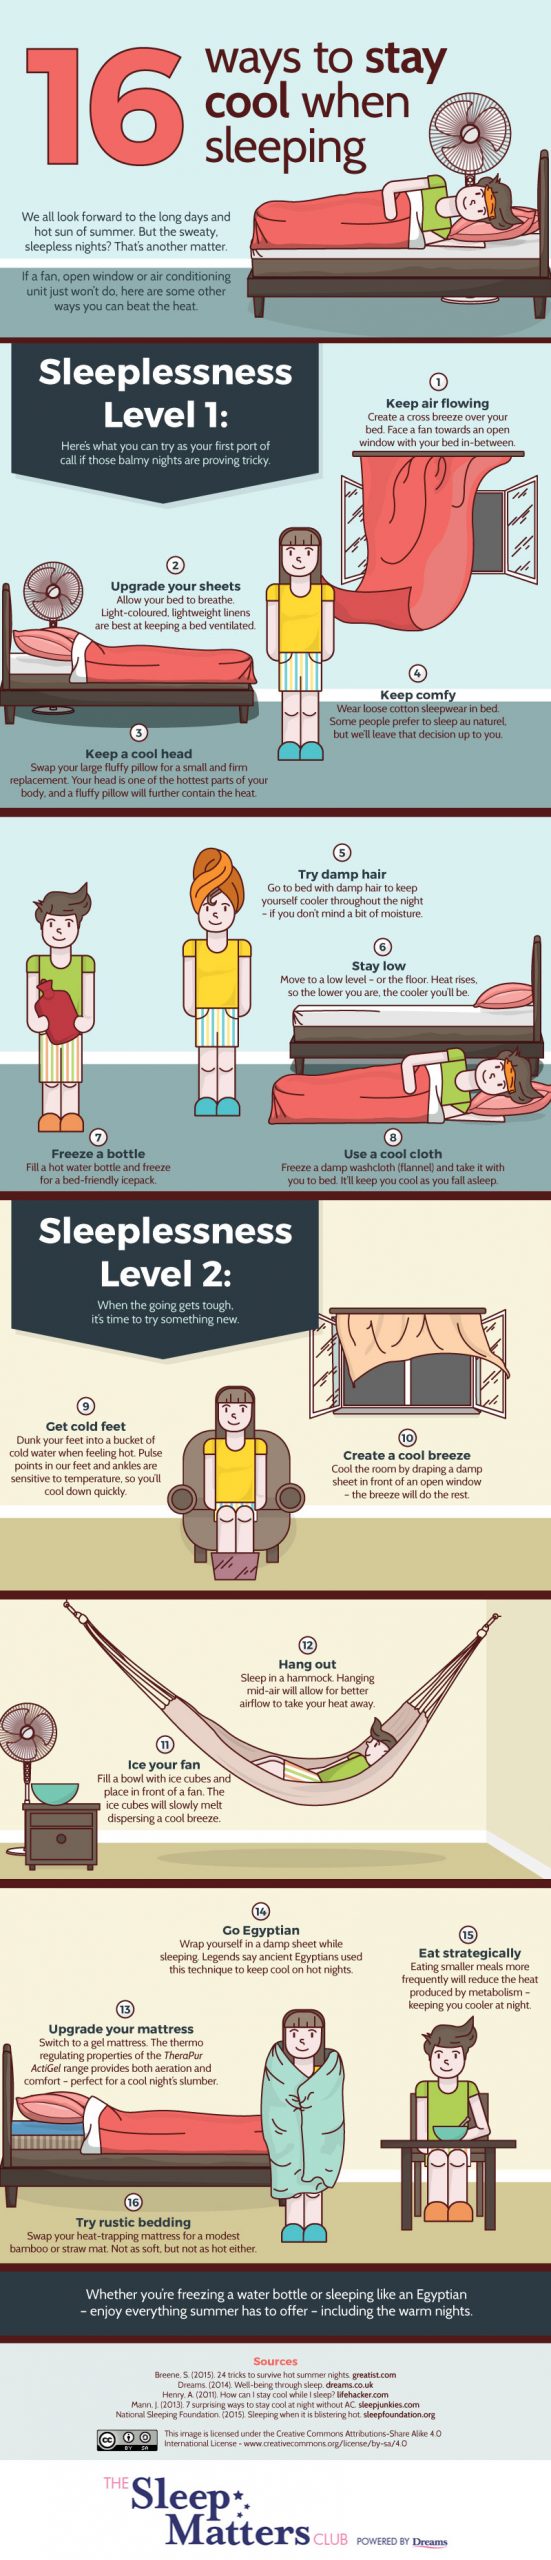 Tips to keep yourself cool during your
sleep this summer